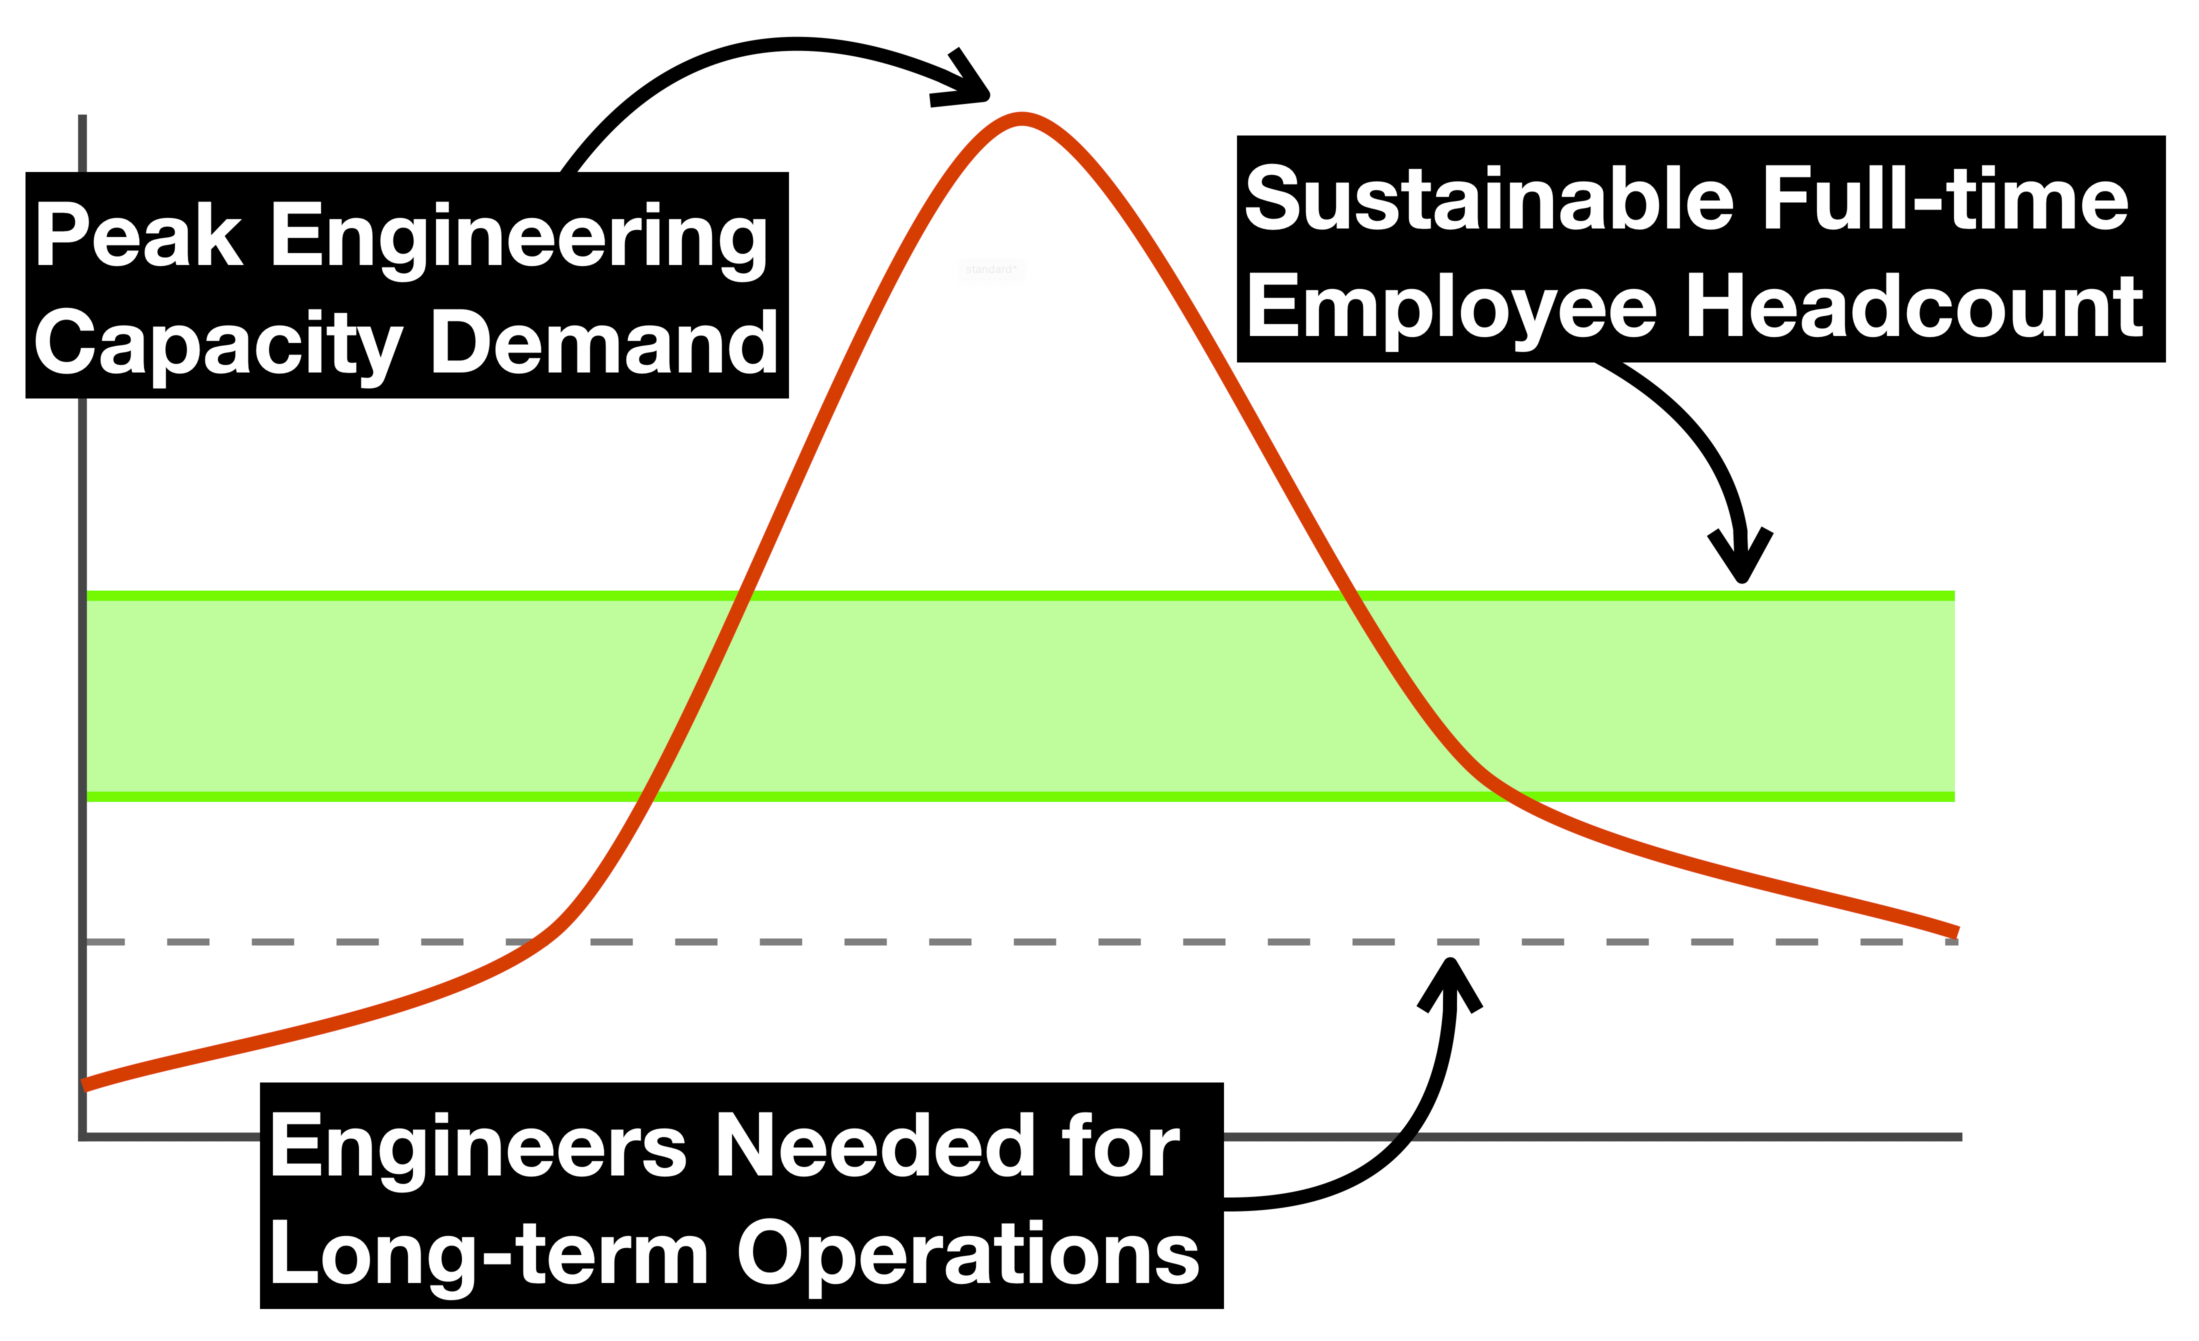 A simple graph showing that the ideal sustainable full-time employee headcount of an engineering org is somewhat above their long-term maintainenance needs but well below the company's peak engineering demand when building new things.